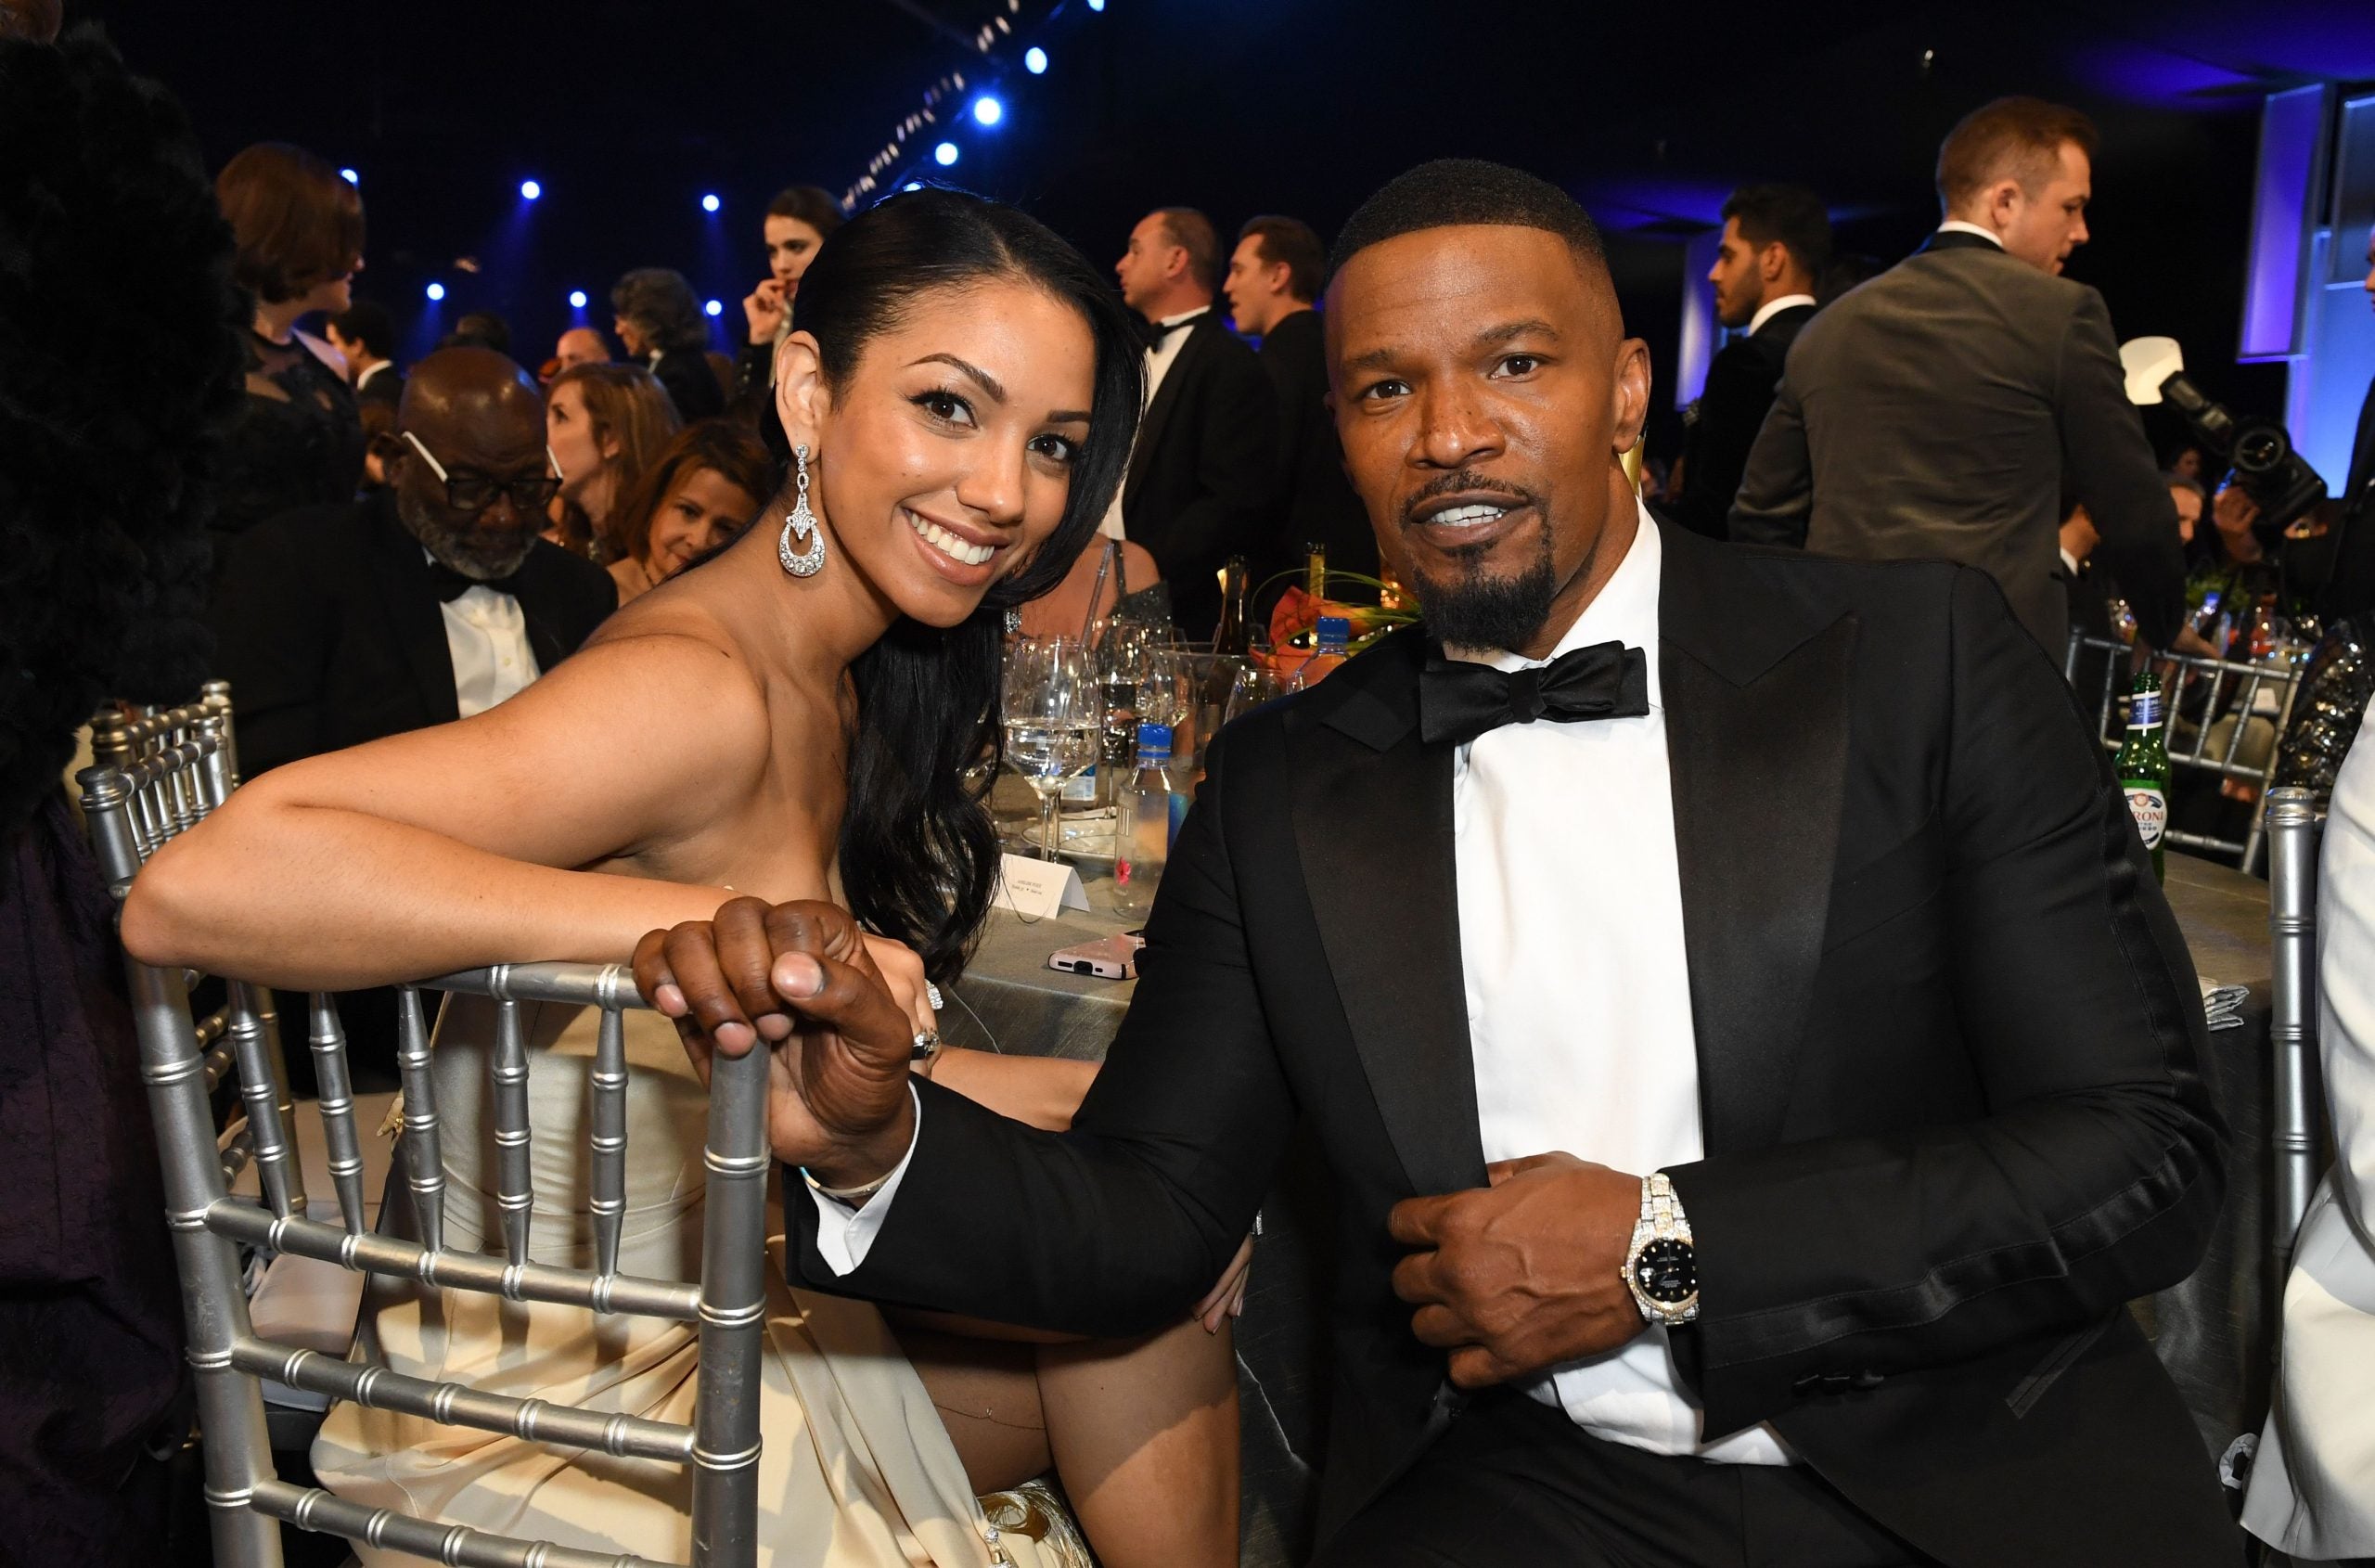 Jamie Foxx And Corinne Foxx To Host New Fox Game Show ‘We Are Family’